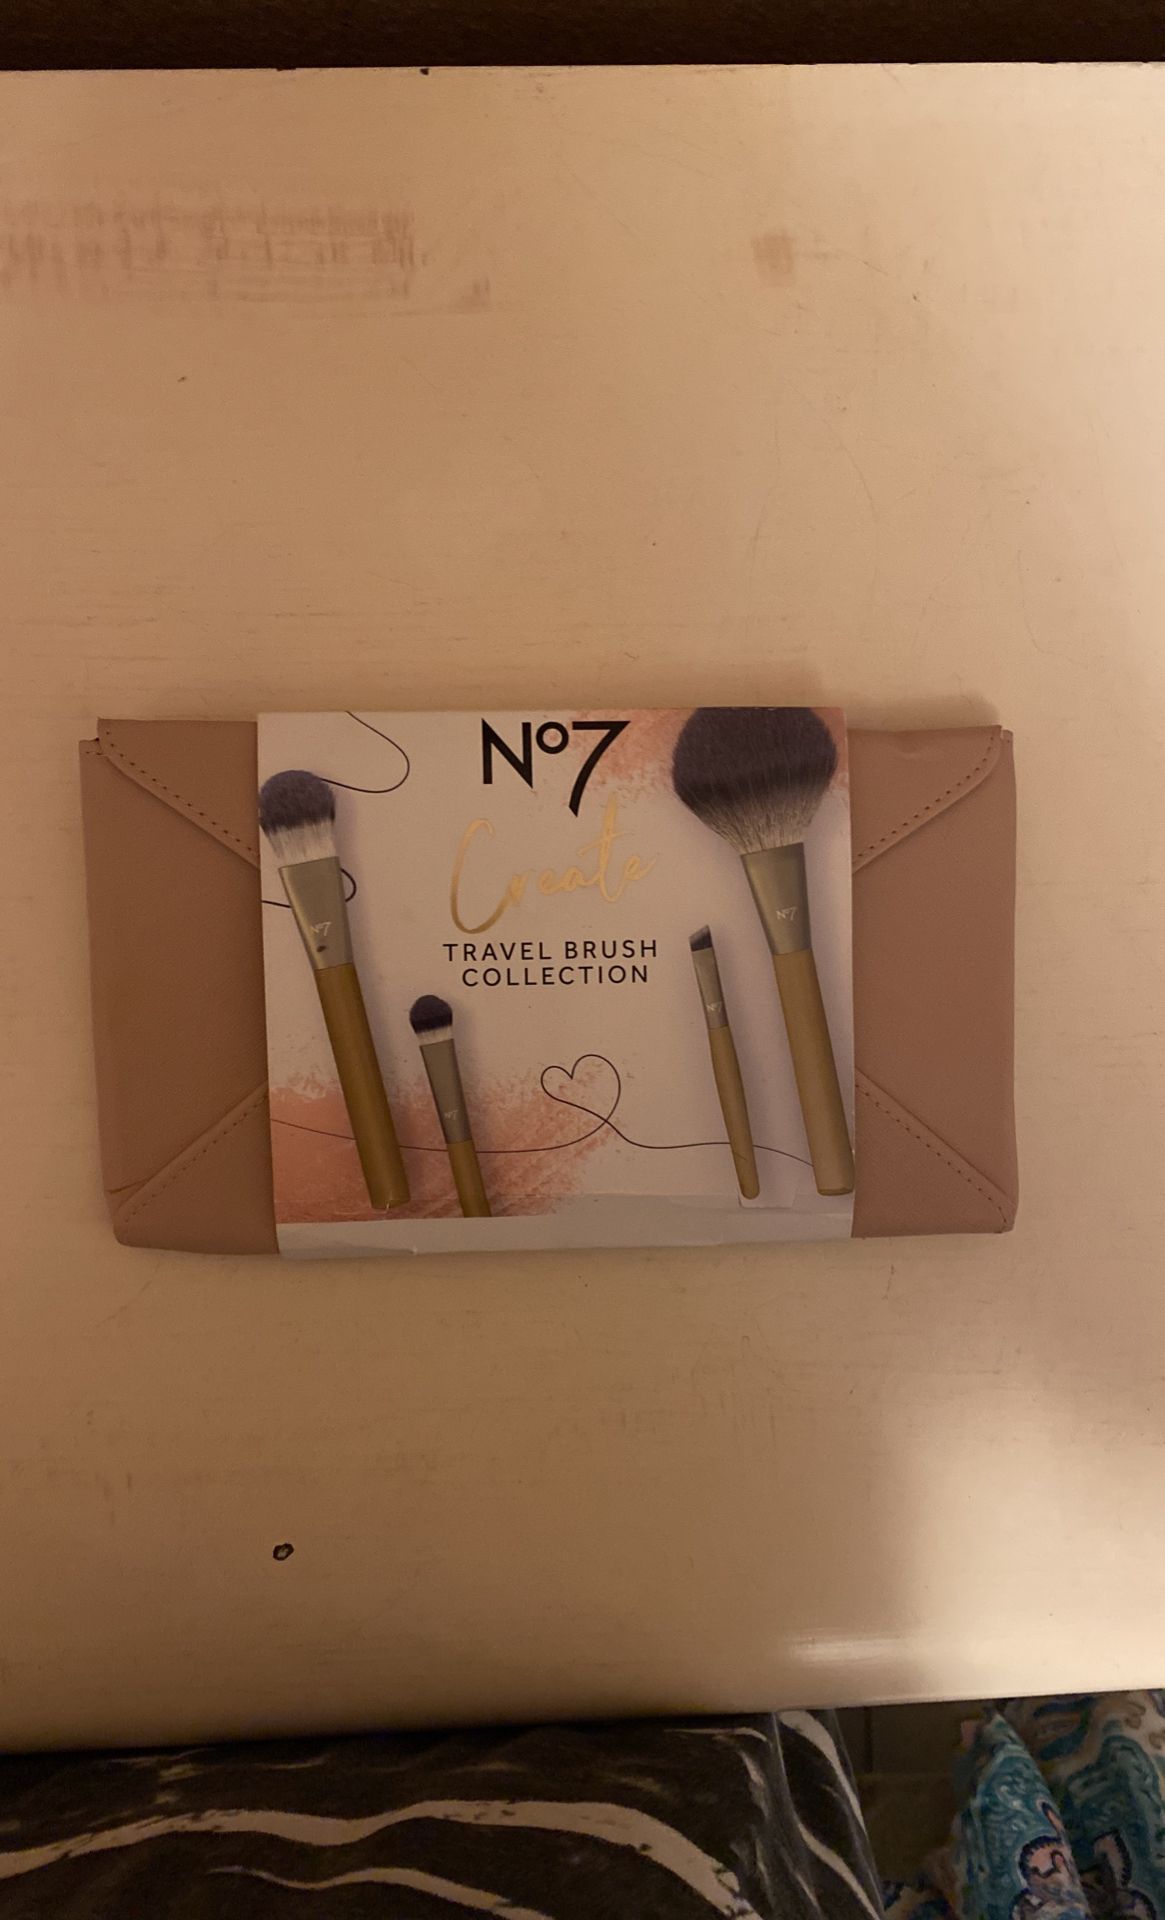 No7 Create Travel Brush Collection Pouch 4 Make Up Brushes $7 Firm C My Page Ty